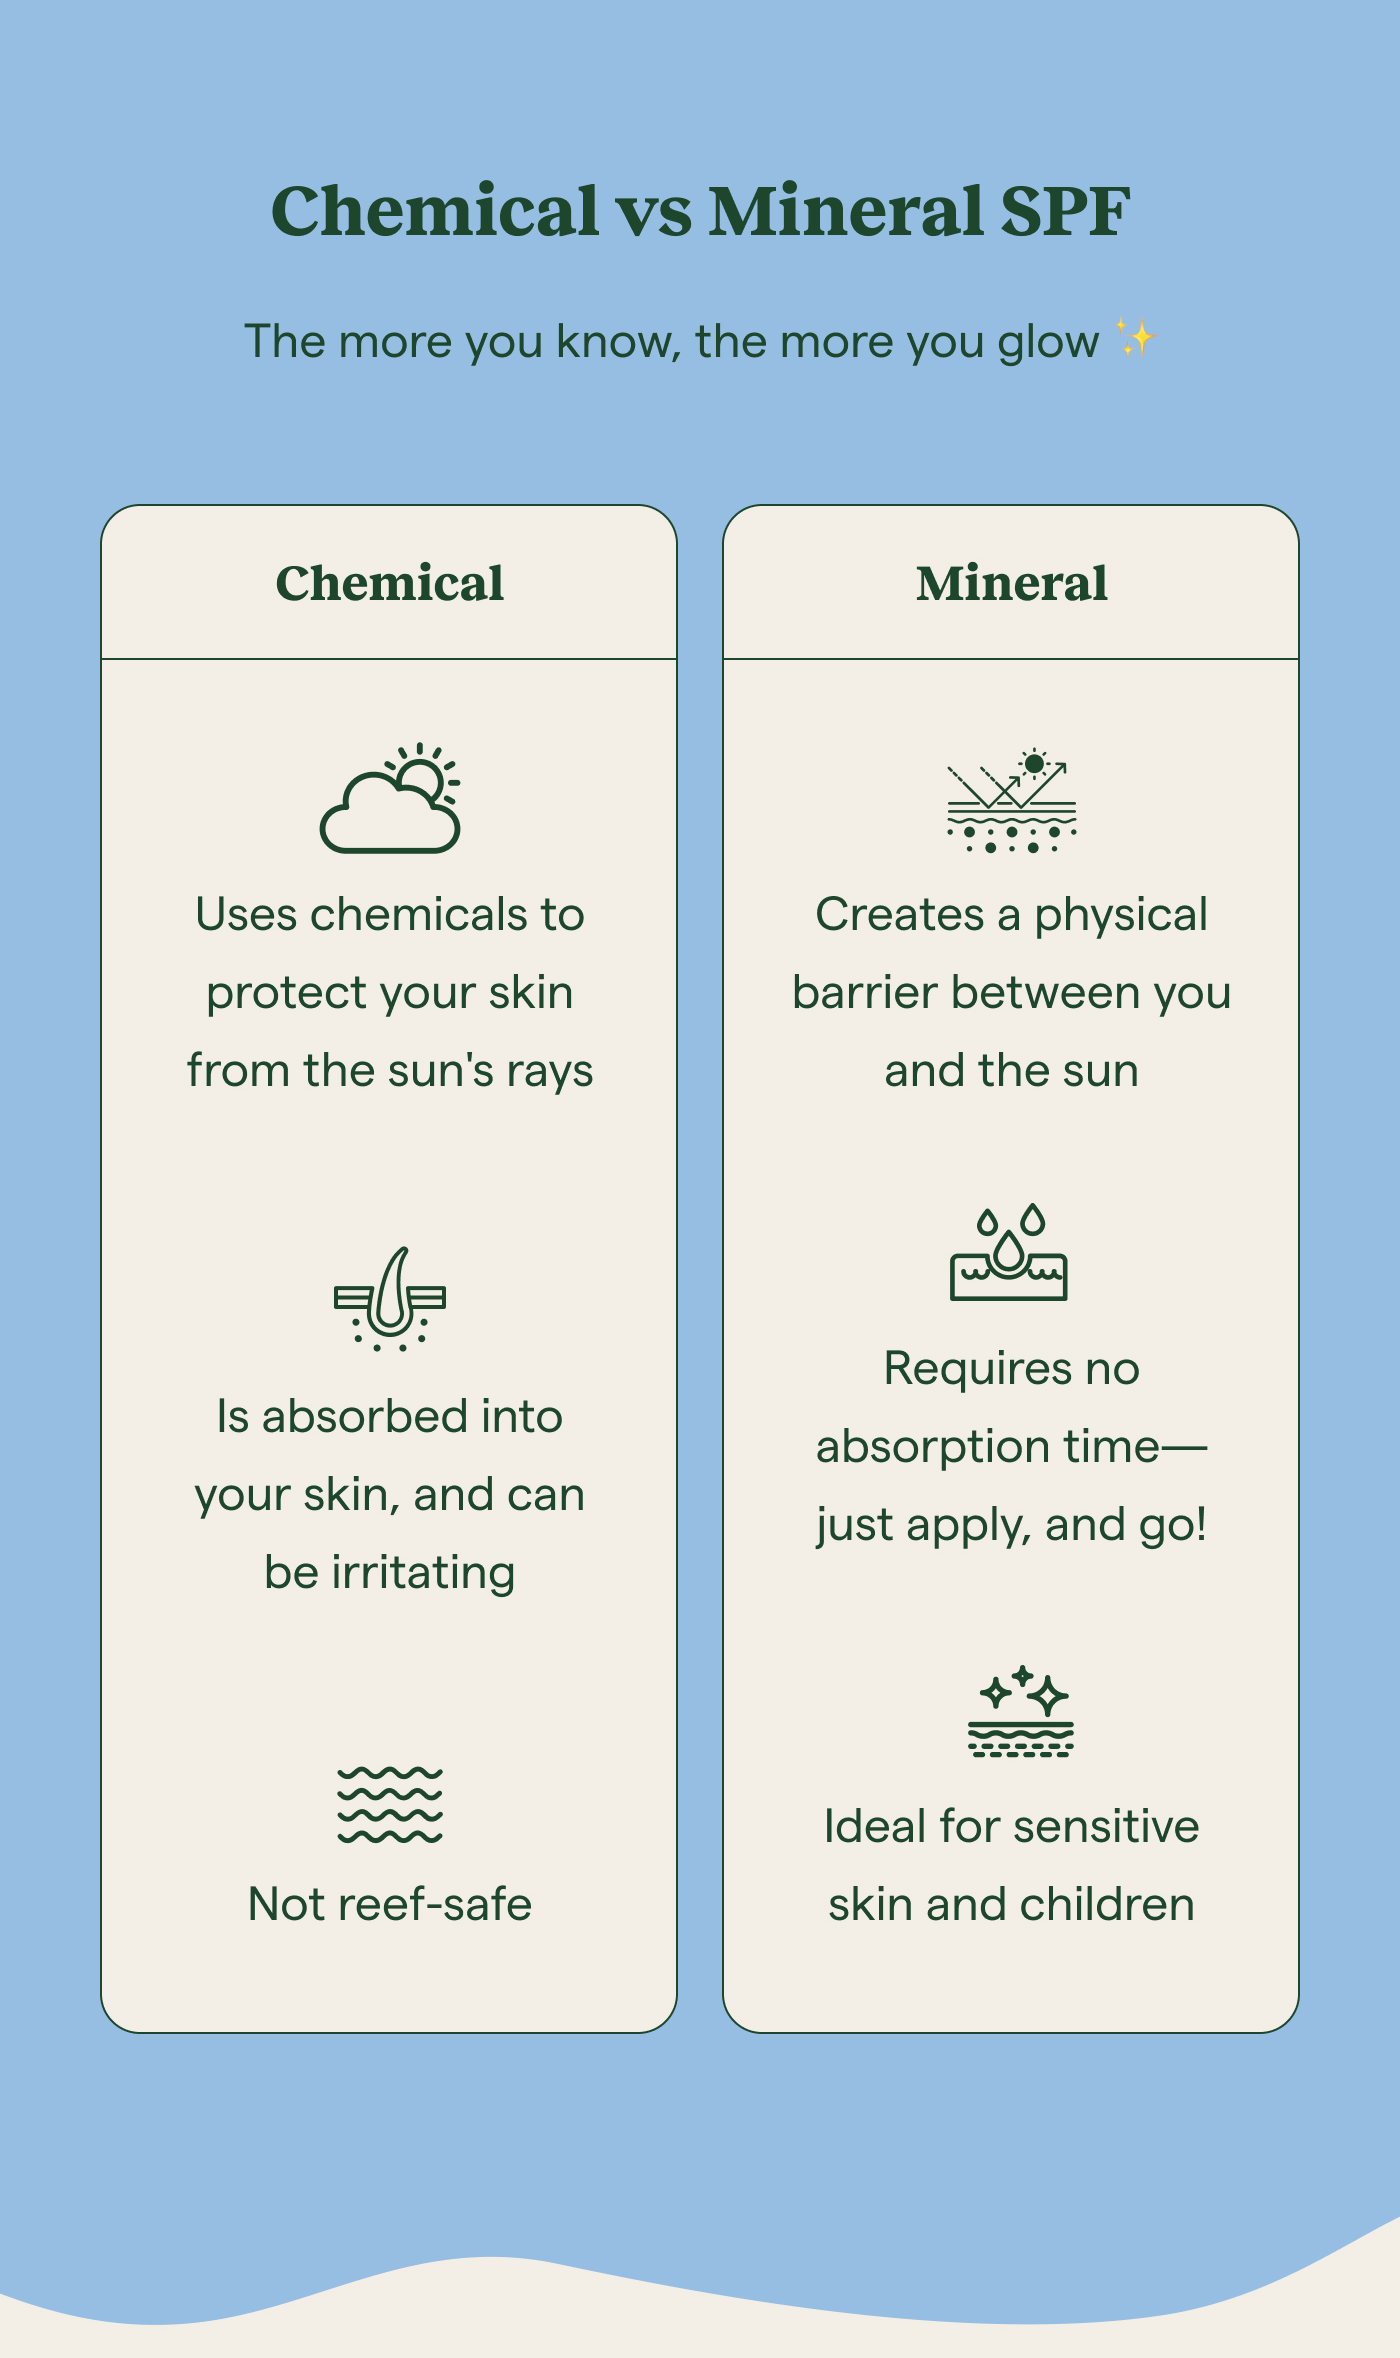 Chemical vs Mineral SPF. The more you know, the more you glow ✨ Chemical Uses chemicals to protect your skin from the sun's rays Not reef-safe Is absorbed into your skin, and can be irritating. Mineral Creates a physical barrier between you and the sun Requires no absorption time—just apply, and go! Ideal for sensitive skin and children.